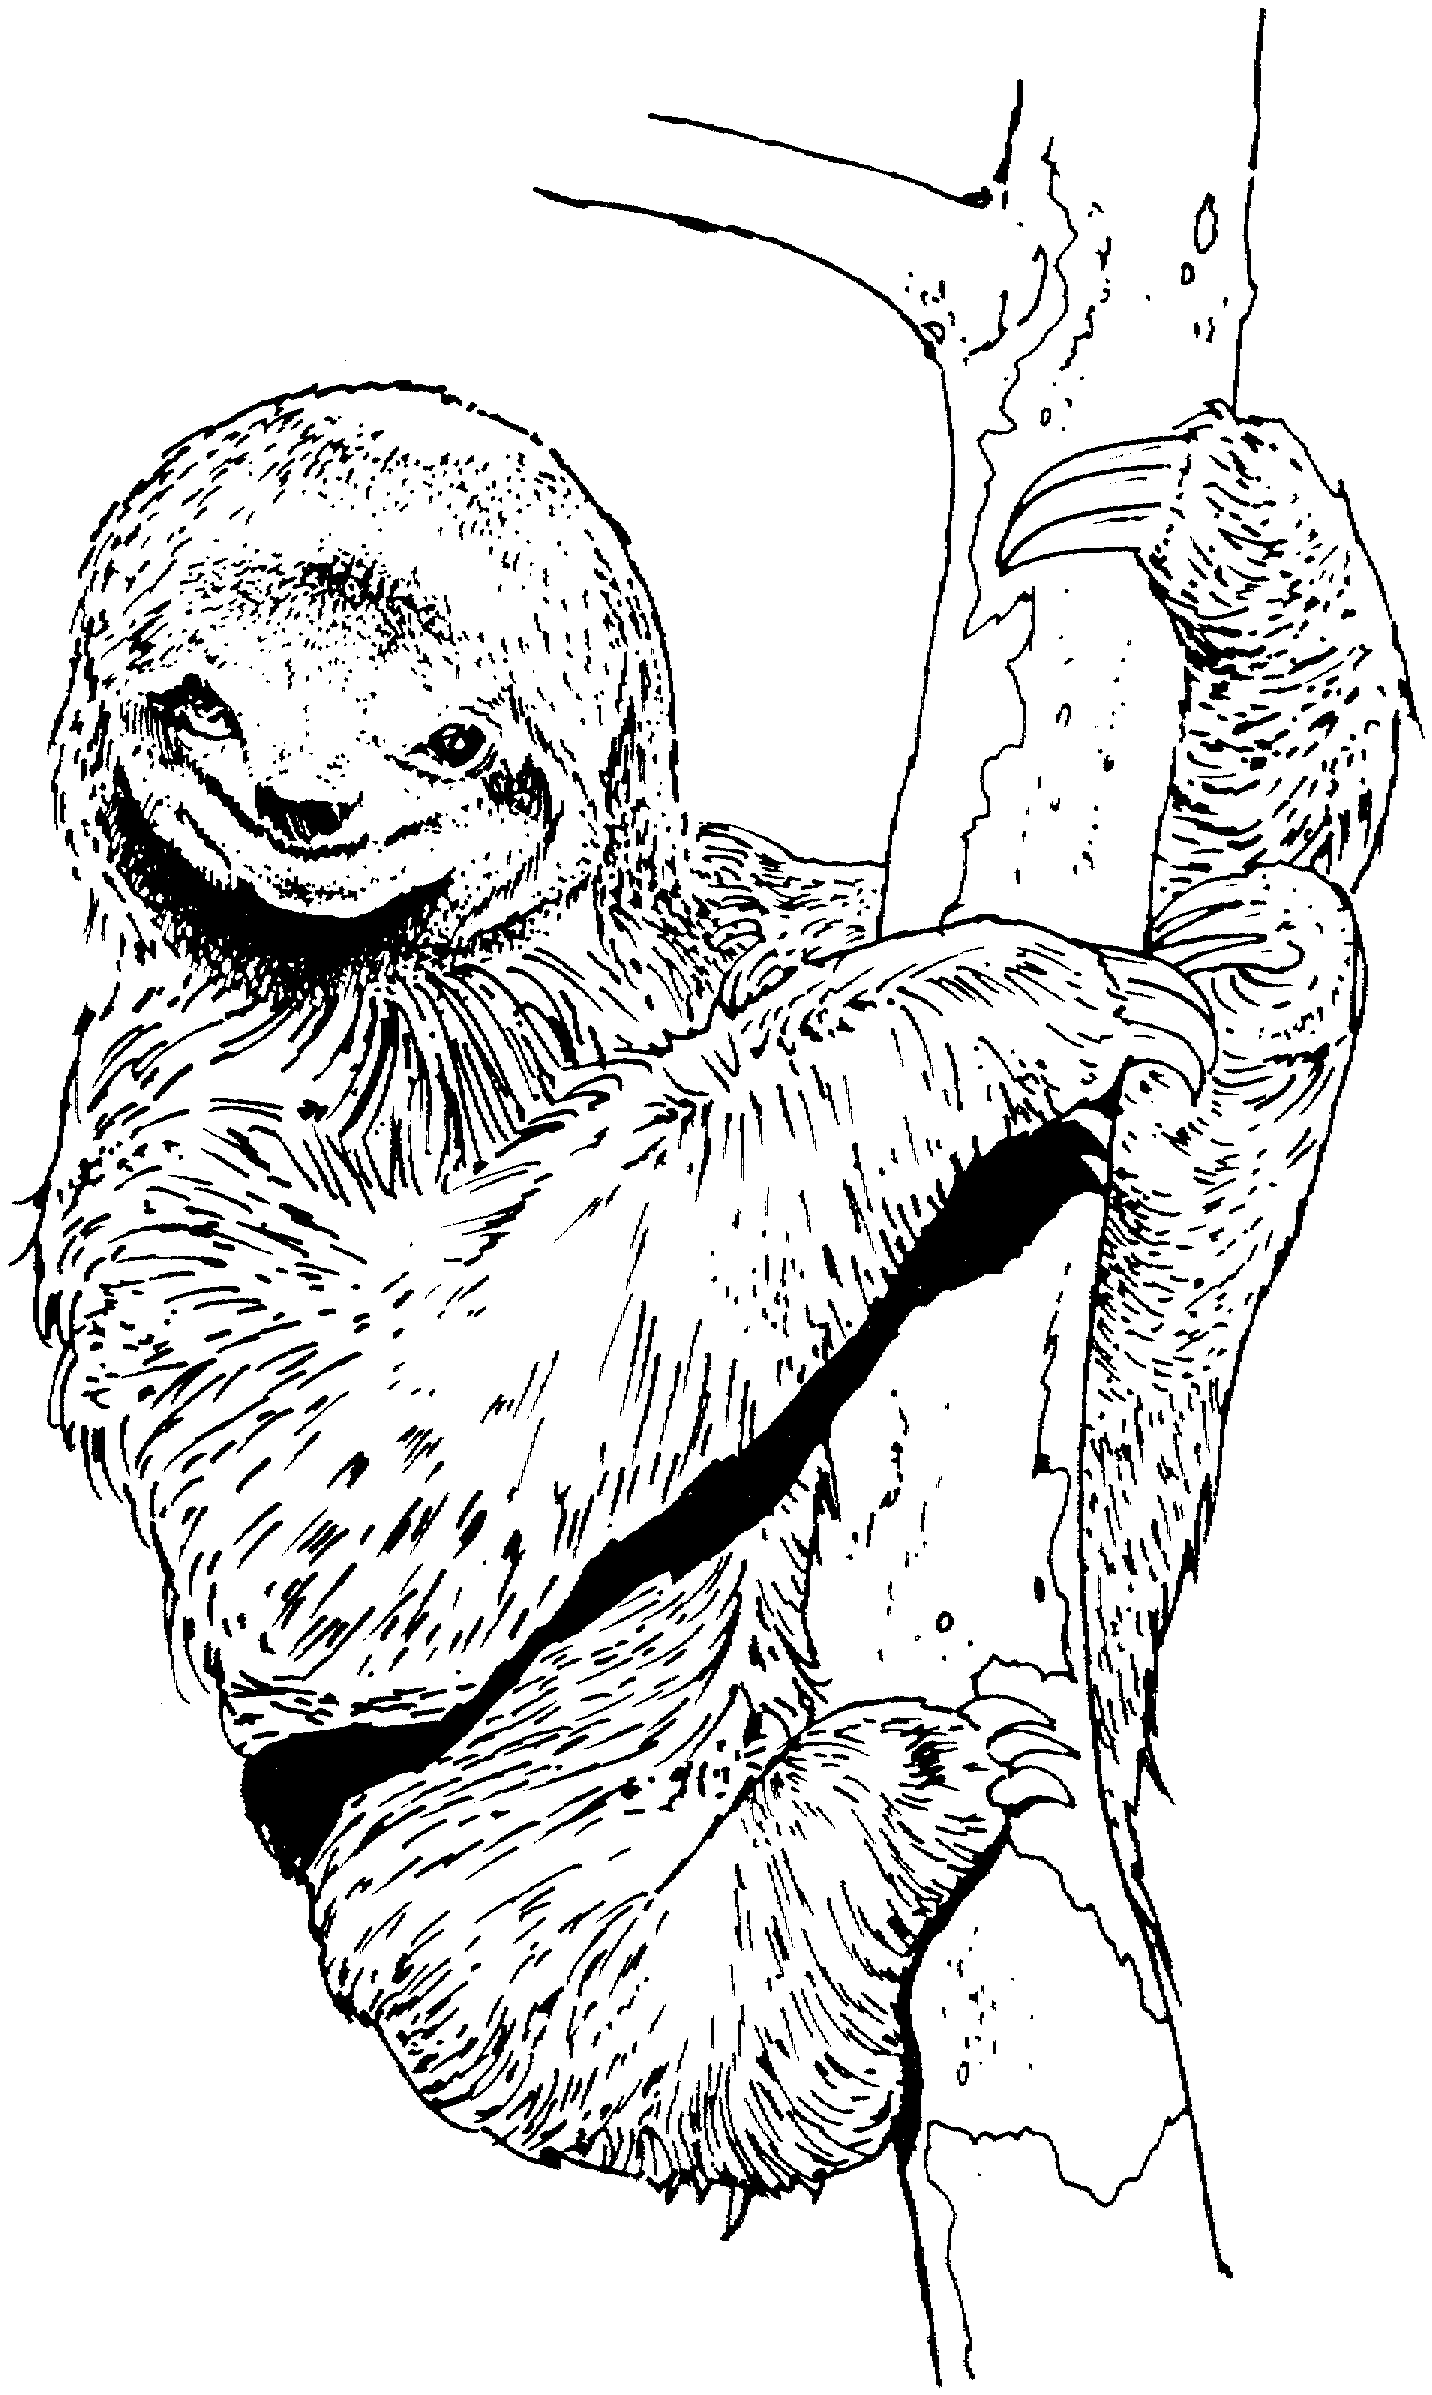 Sloth Printable Coloring Pages